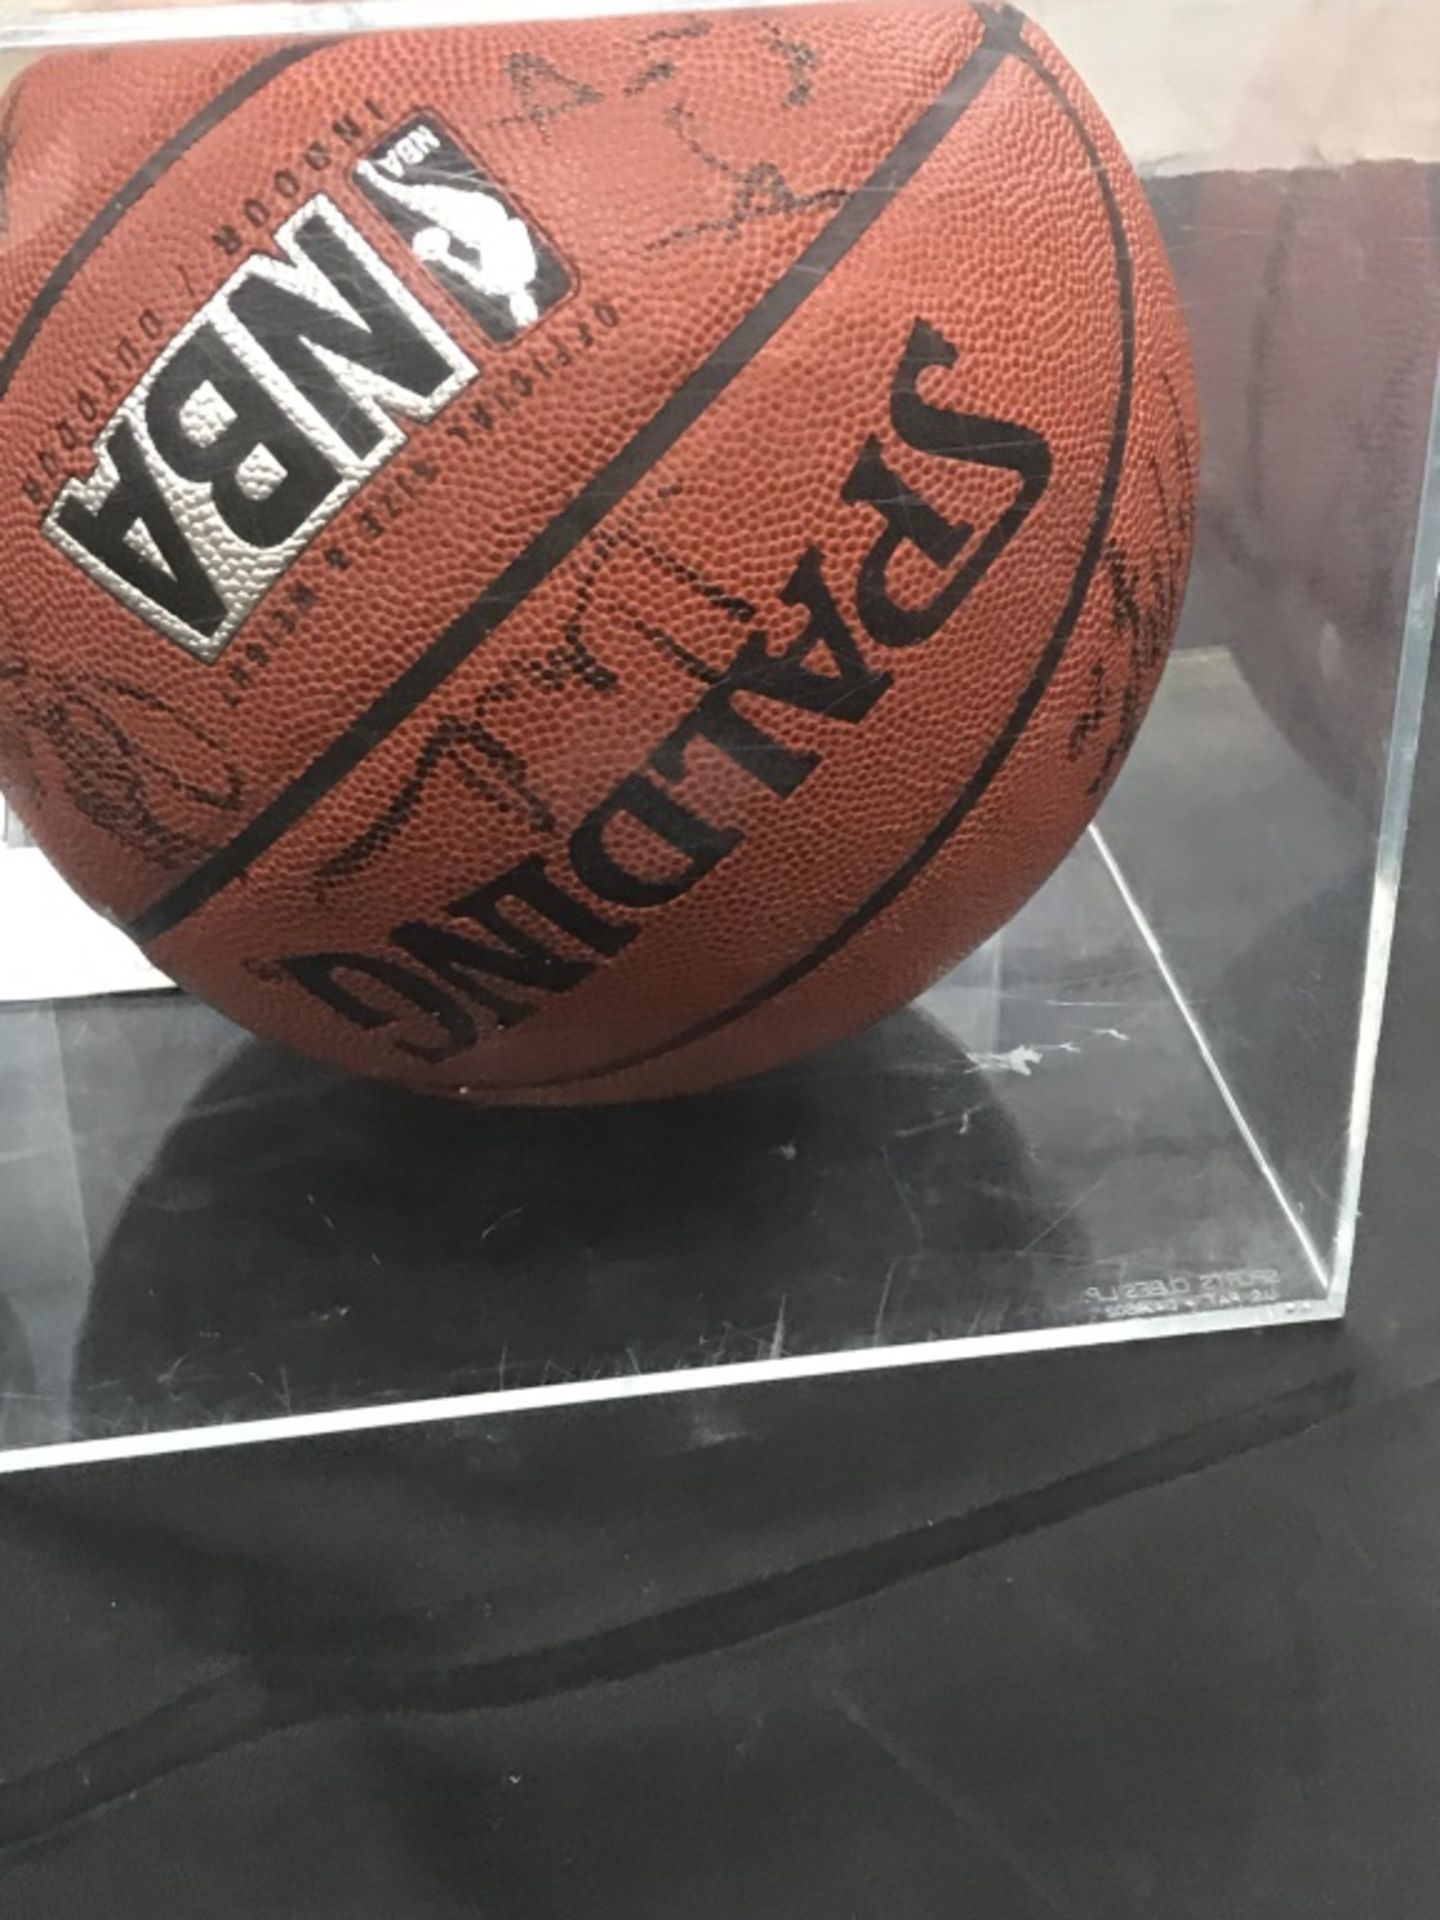 Basketball Signed by Rockets Team - Image 9 of 10